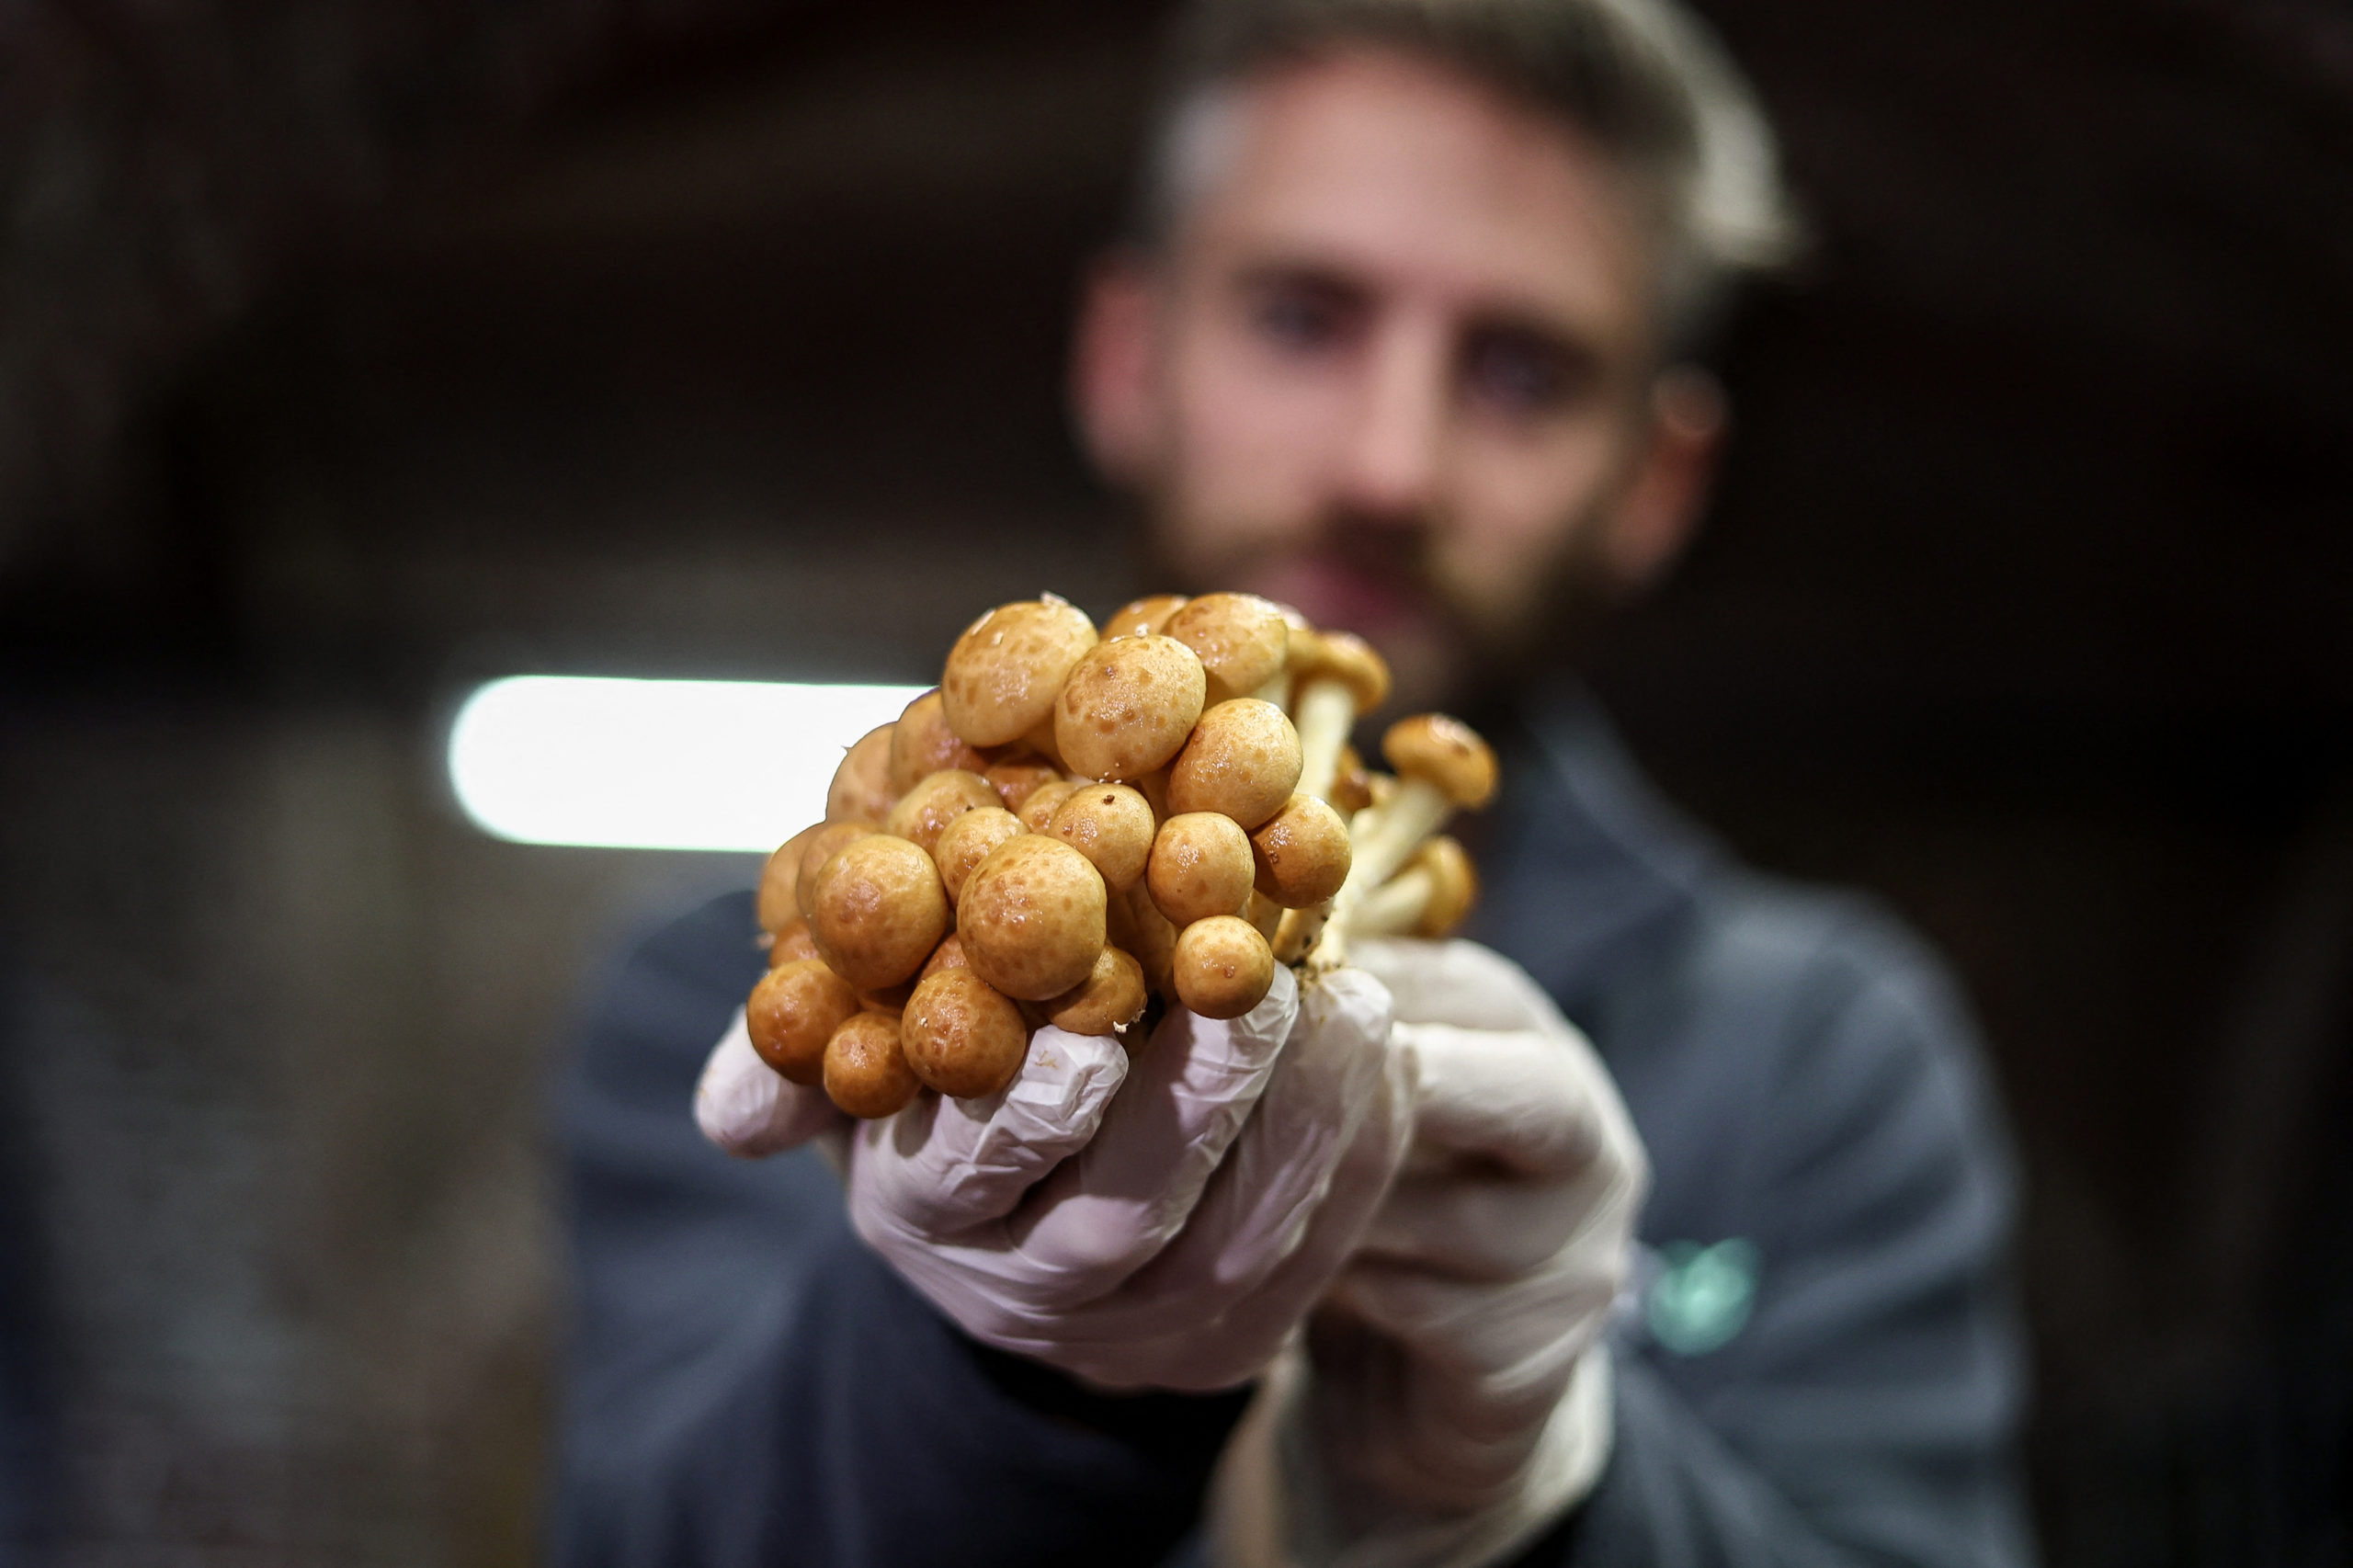 Eclo's Co-funder Quentin Declerck holds mushrooms produced by the company Eclo, which recycles bread and beer to grow organic mushrooms in Brussels, on September 30, 2022. (Photo by Kenzo TRIBOUILLARD / AFP) (Photo by KENZO TRIBOUILLARD/AFP via Getty Images)